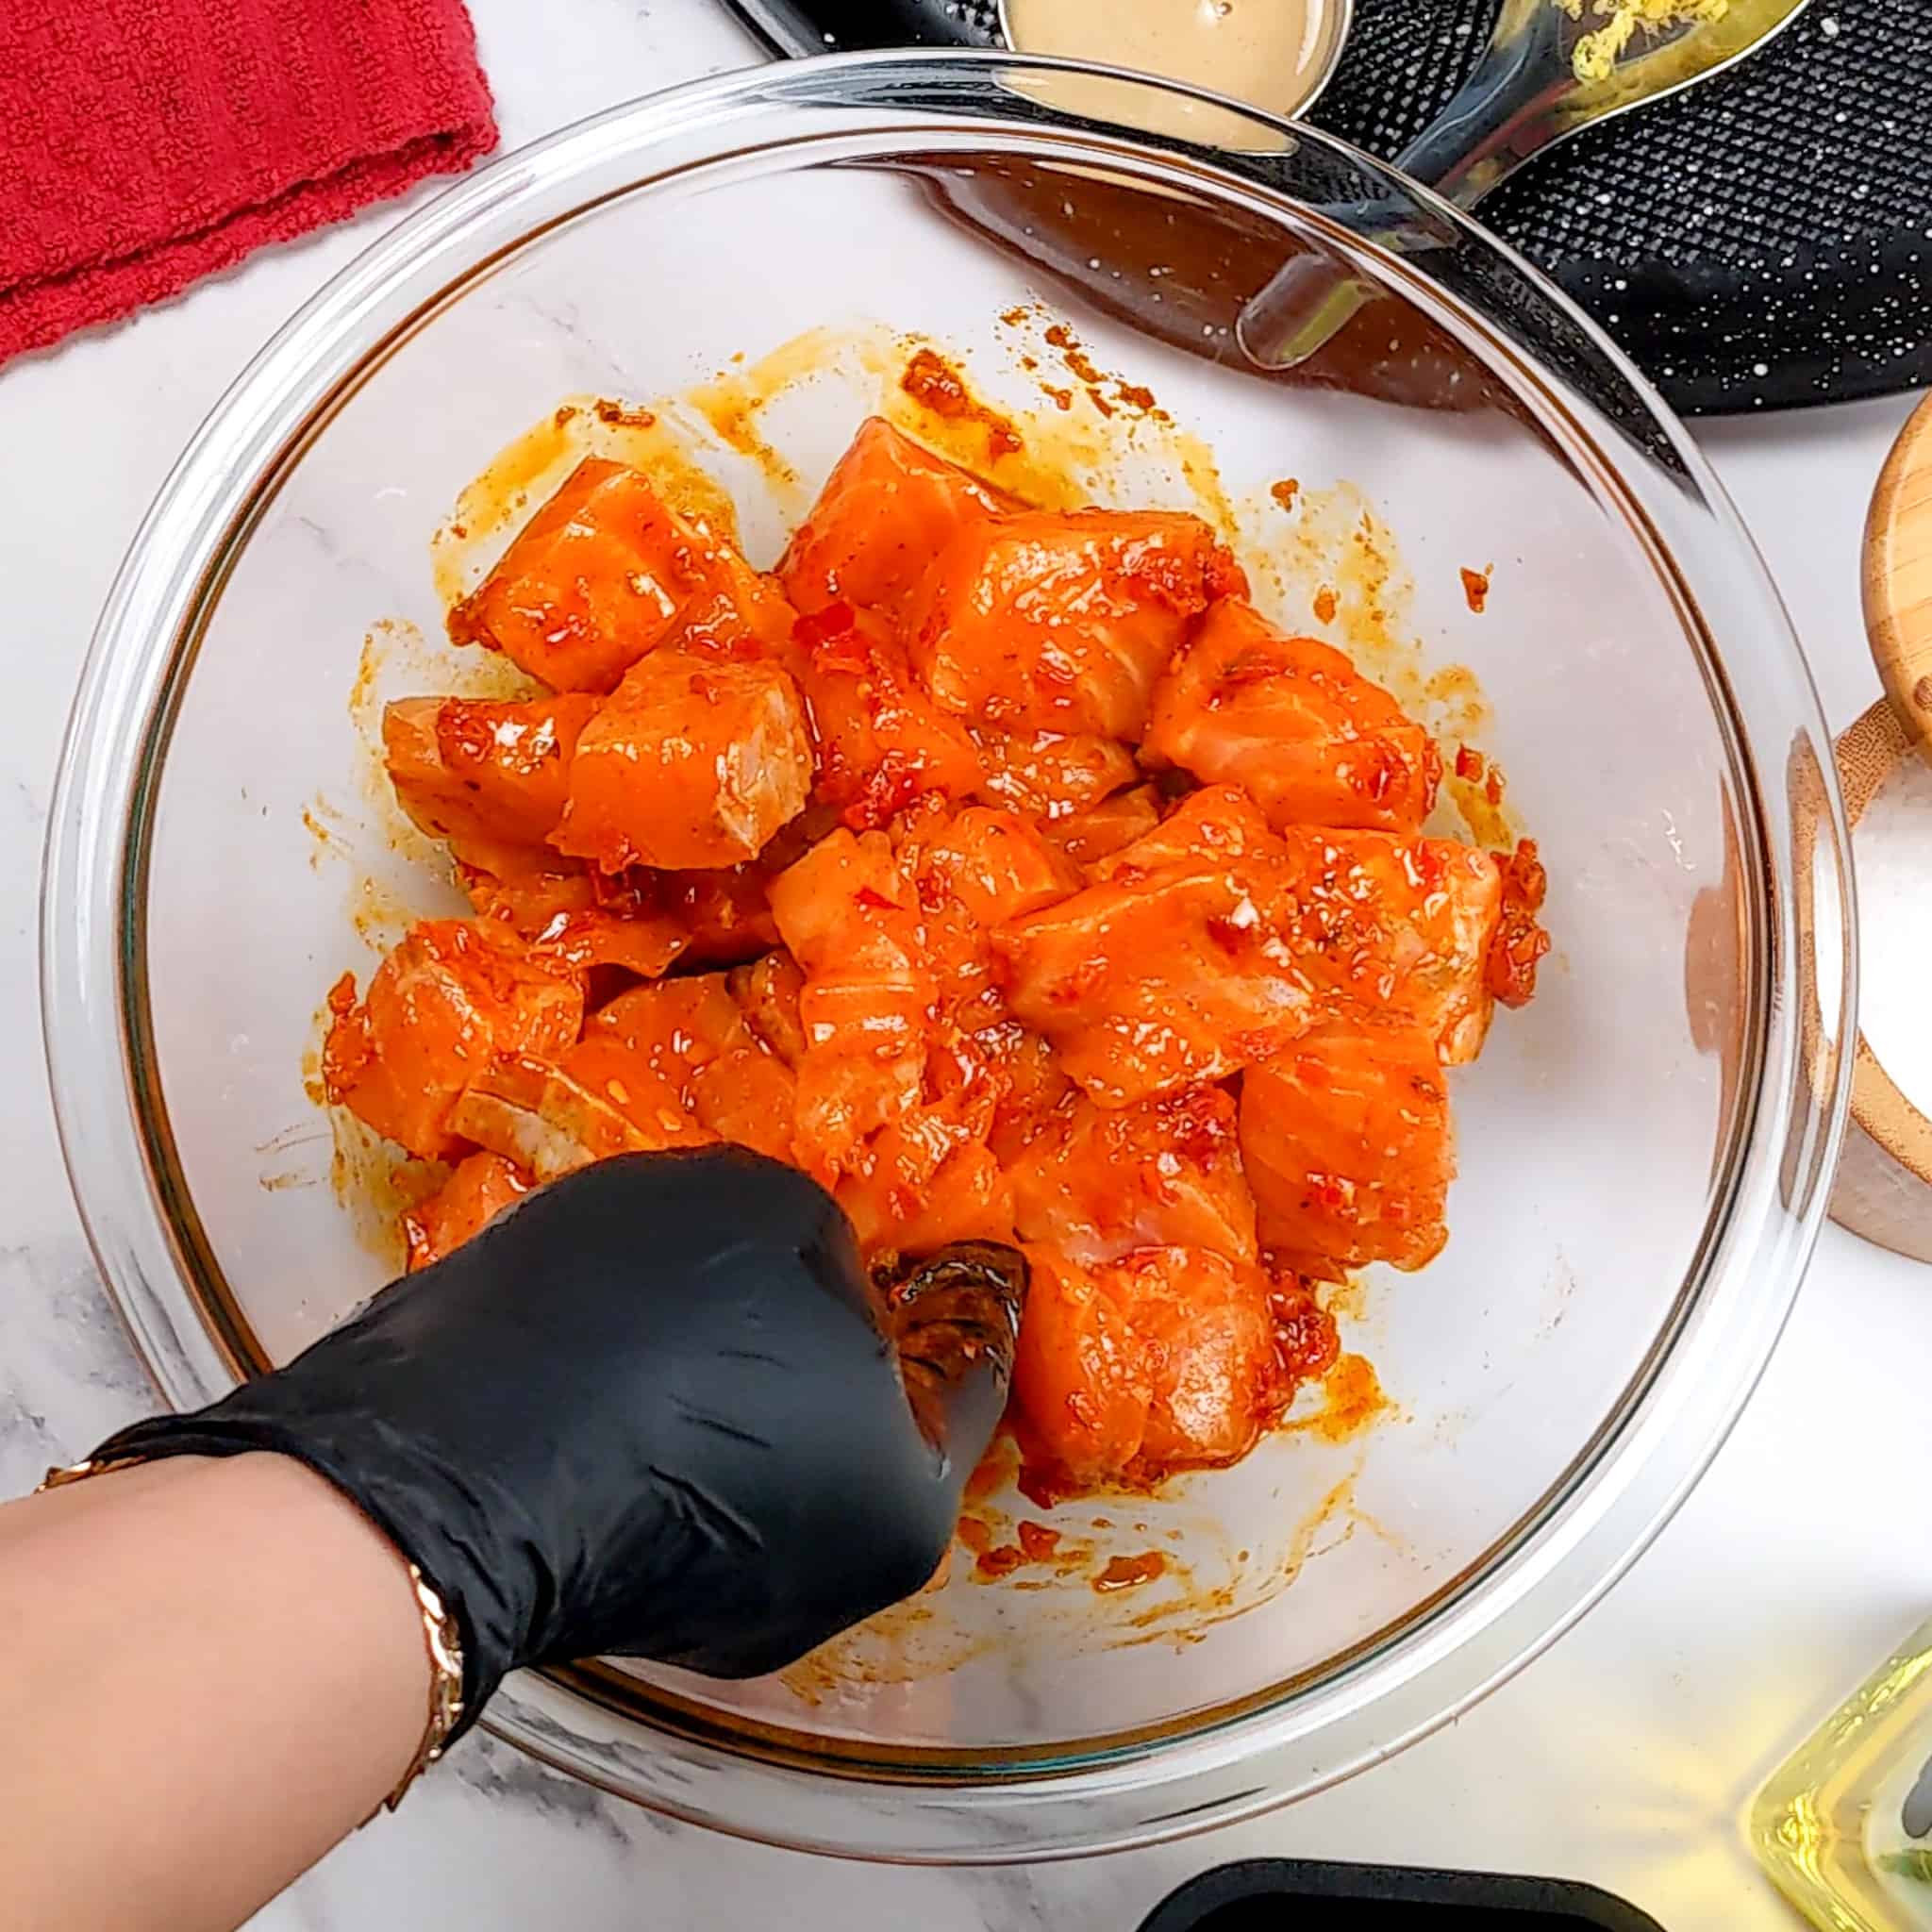 gloved hands mixing the calabrian chili paste with the large salmon chunks in a glass mixing bowl